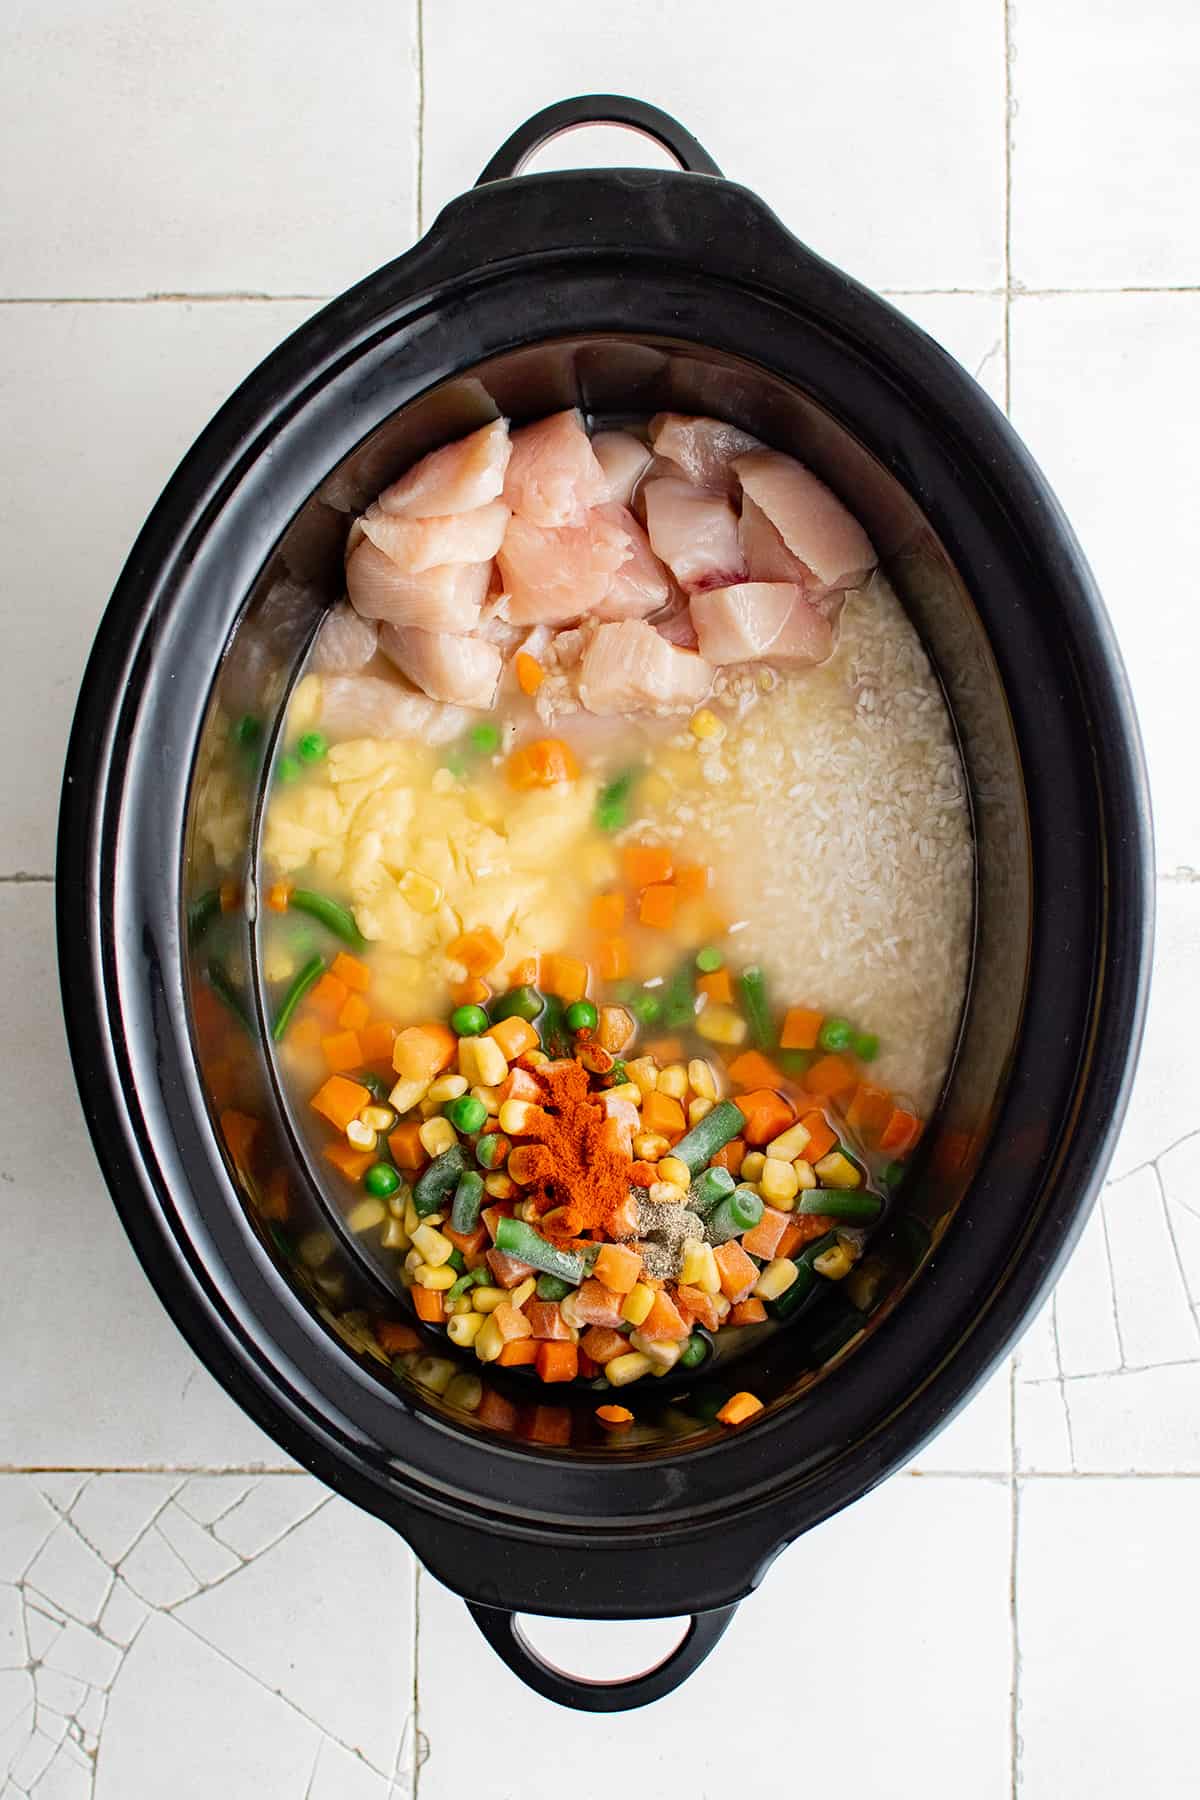 ingredients for slow cooker chicken and rice